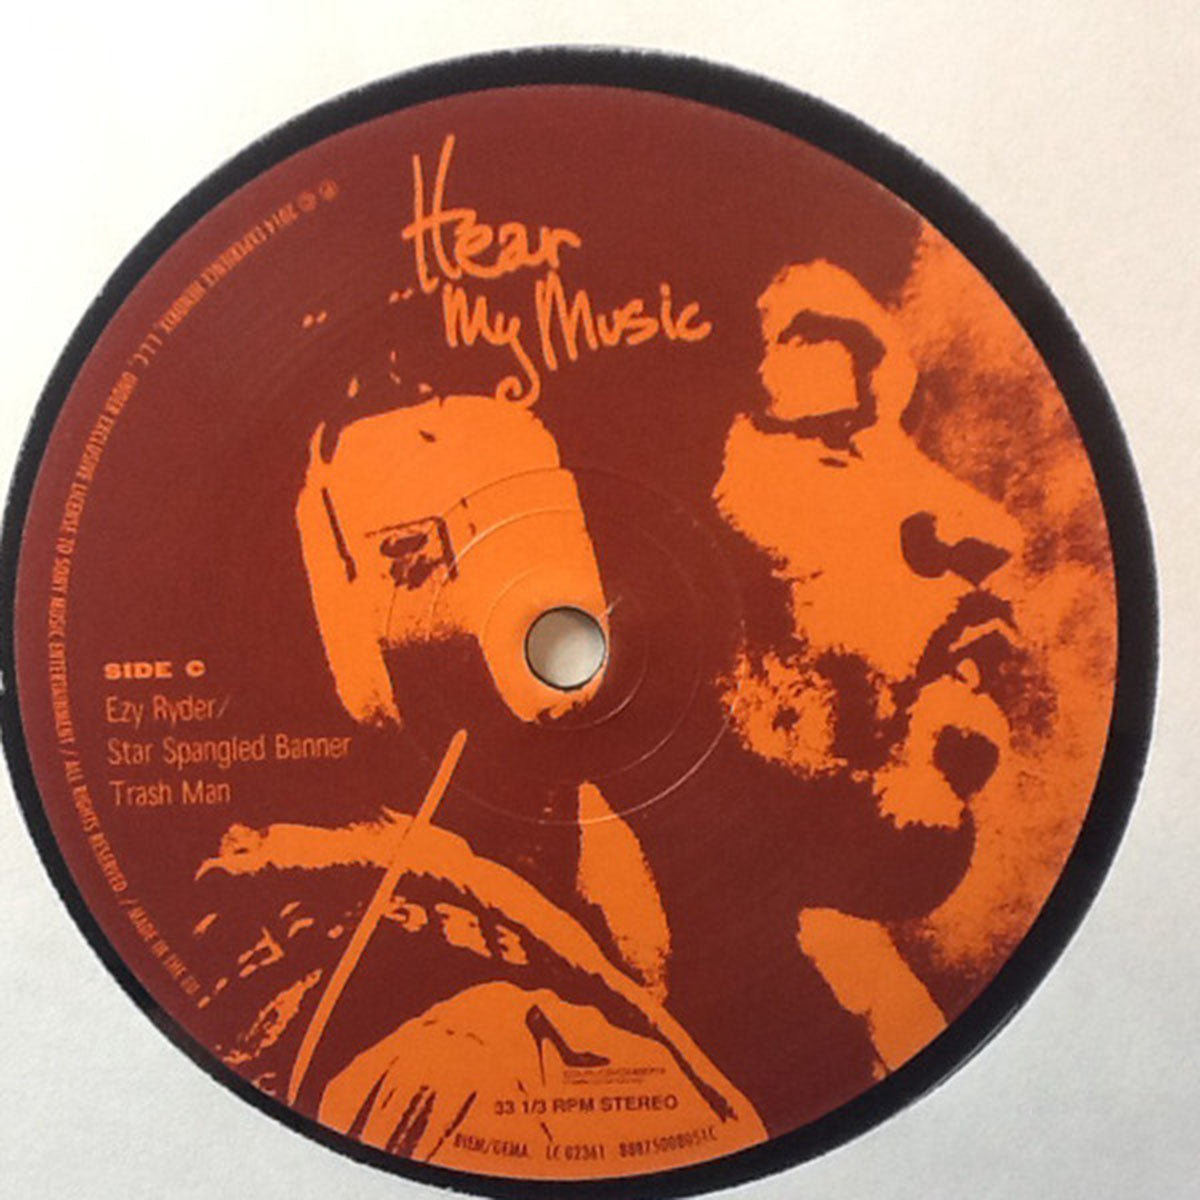 Jimi Hendrix ‎– Hear My Music - Numbered Limited Edition